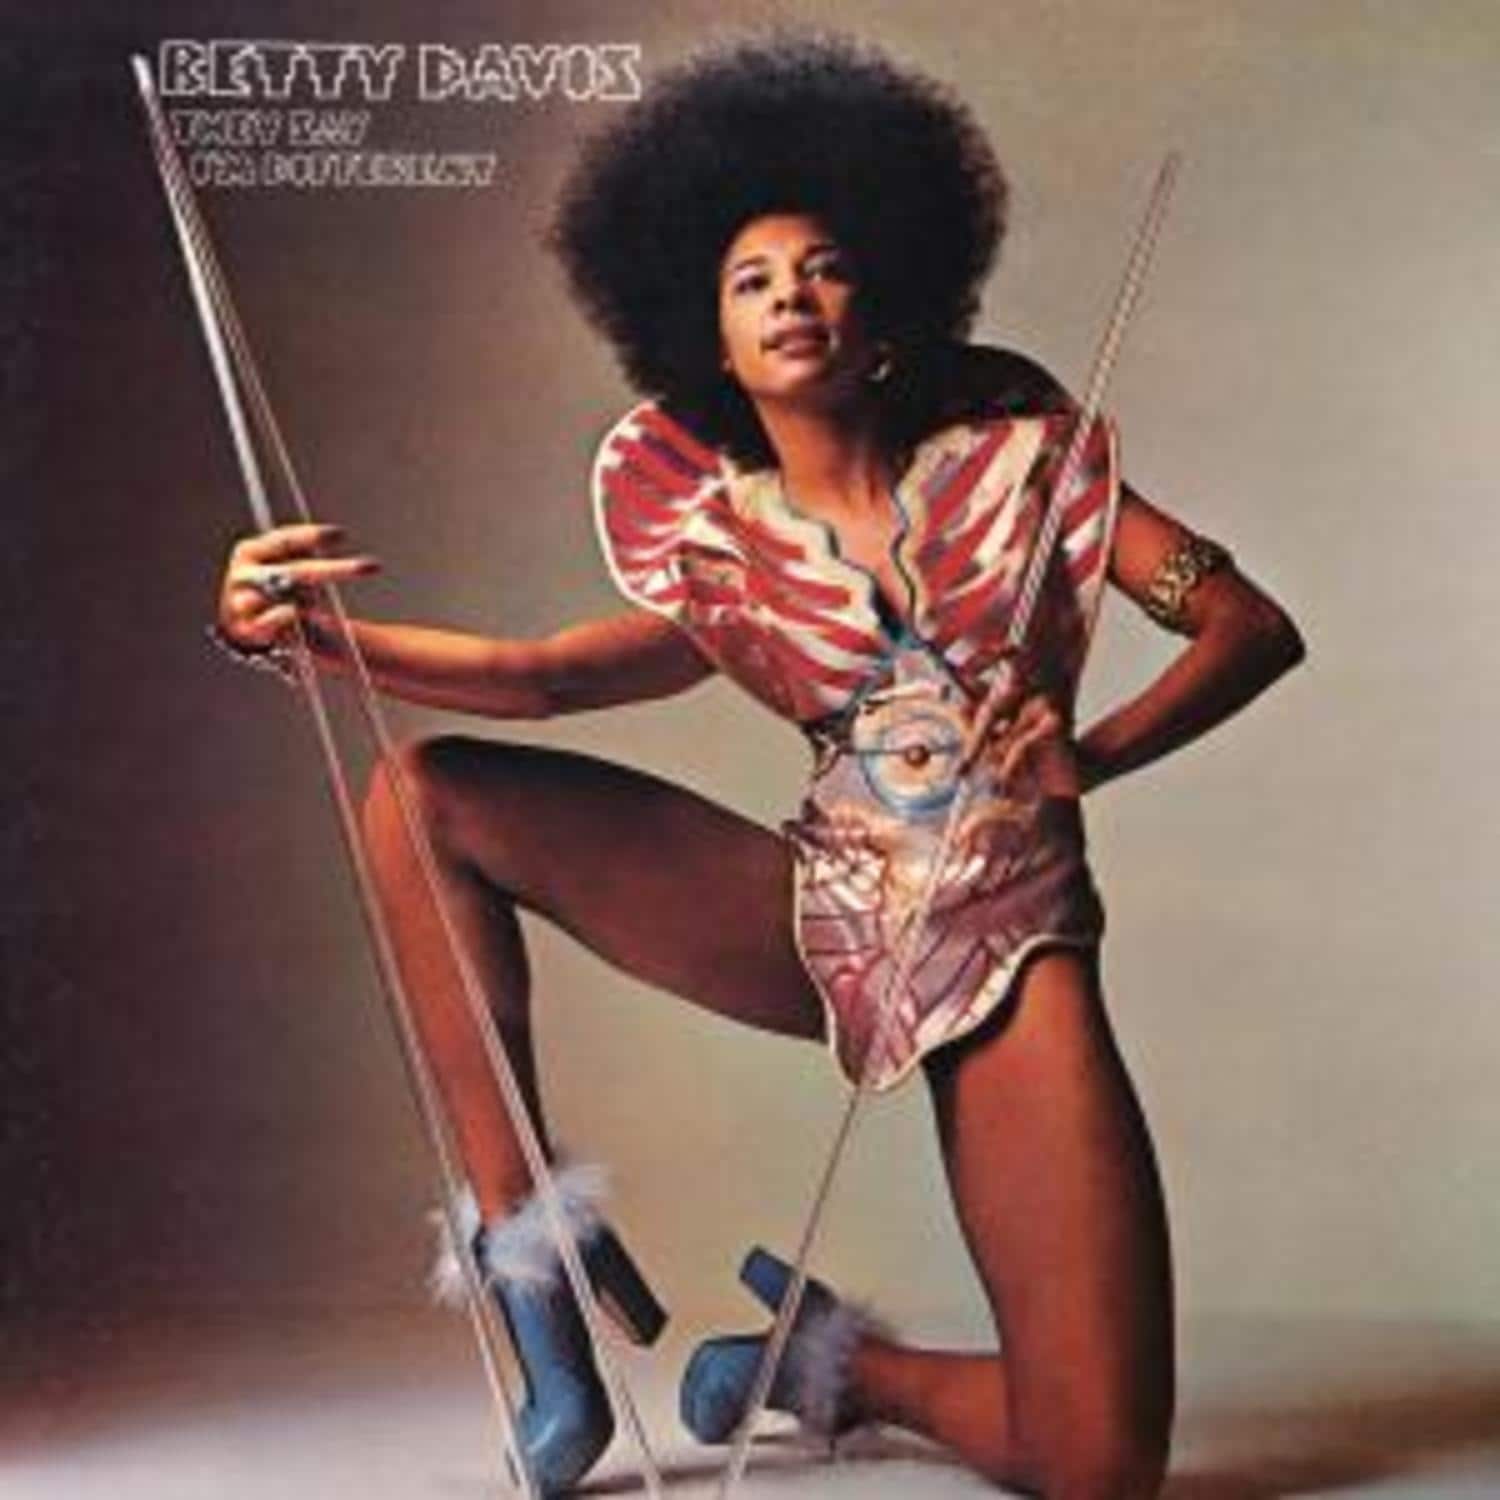 Betty Davis - THEY SAY I M DIFFERENT 